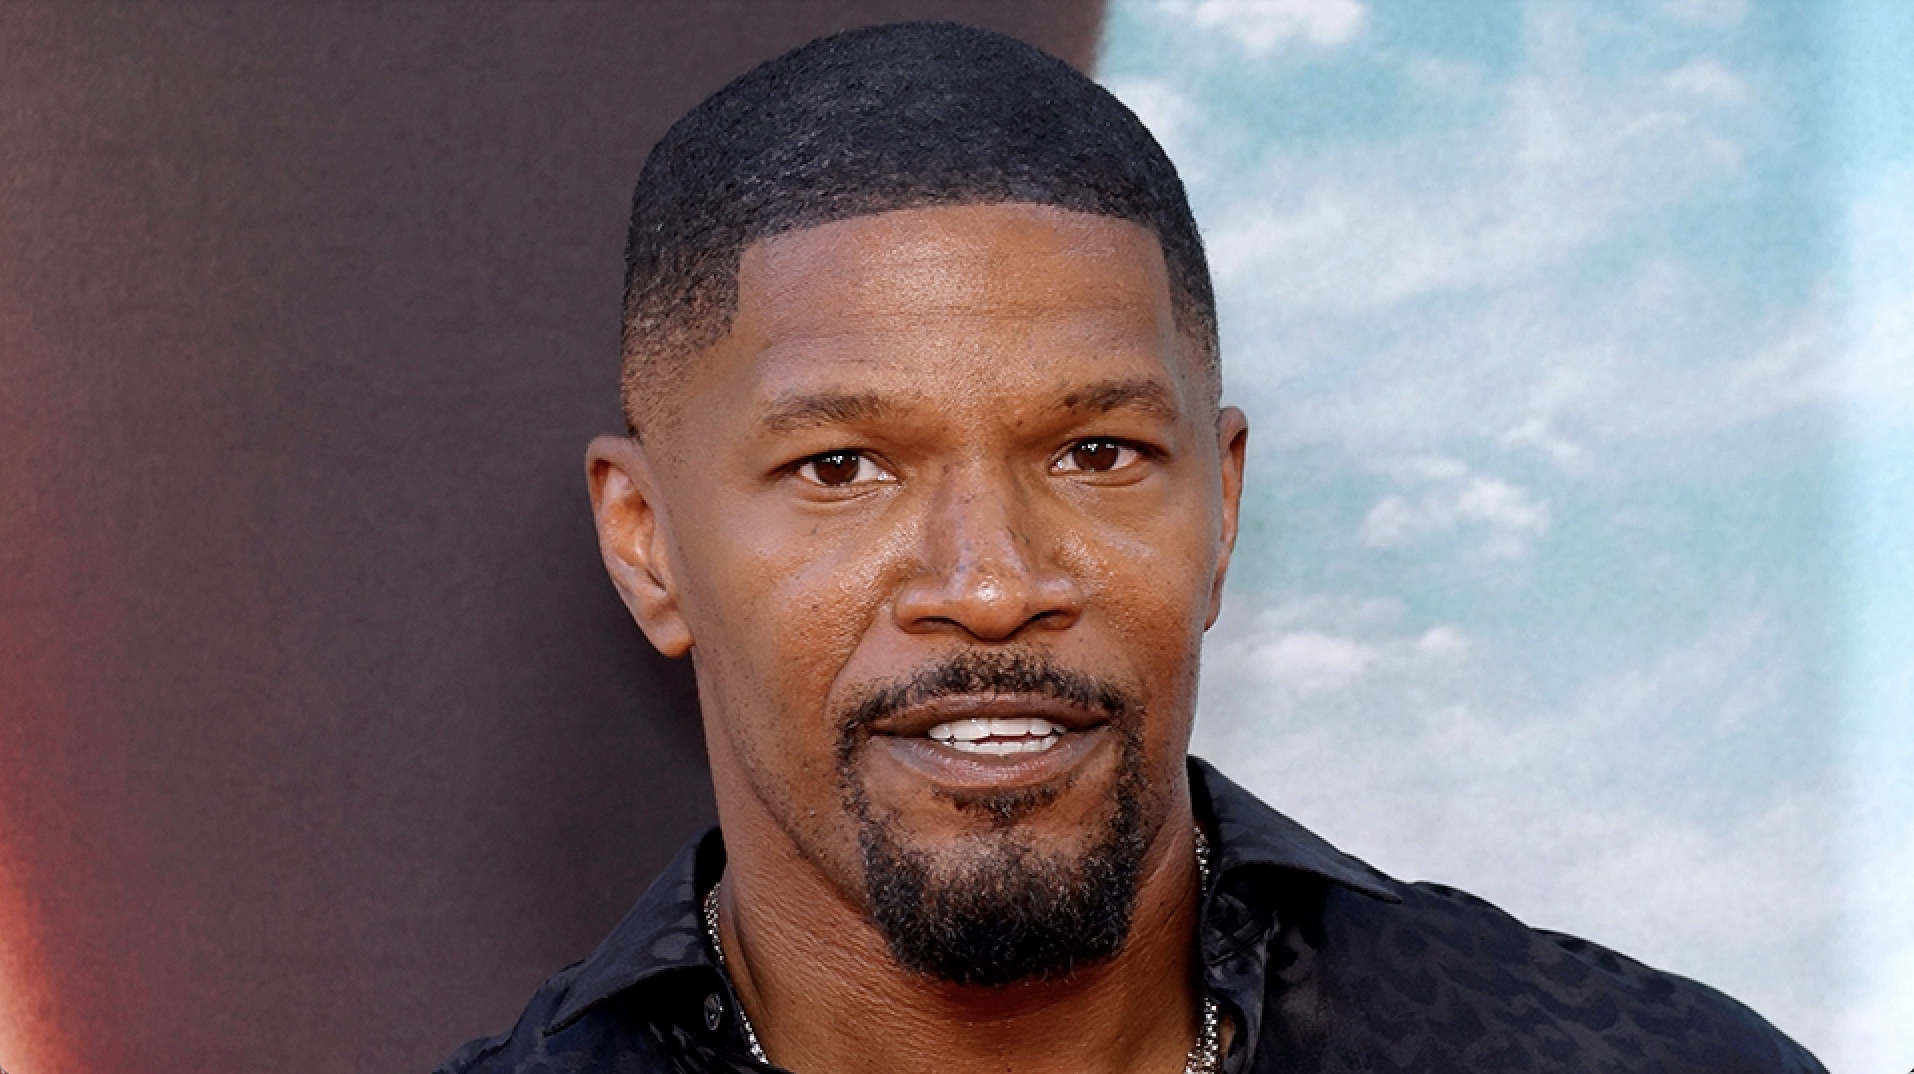 Jamie Foxx apologizes for Jesus and ‘fake friends’ post after he’s accused of anti-Semitism: ‘Never my intent’